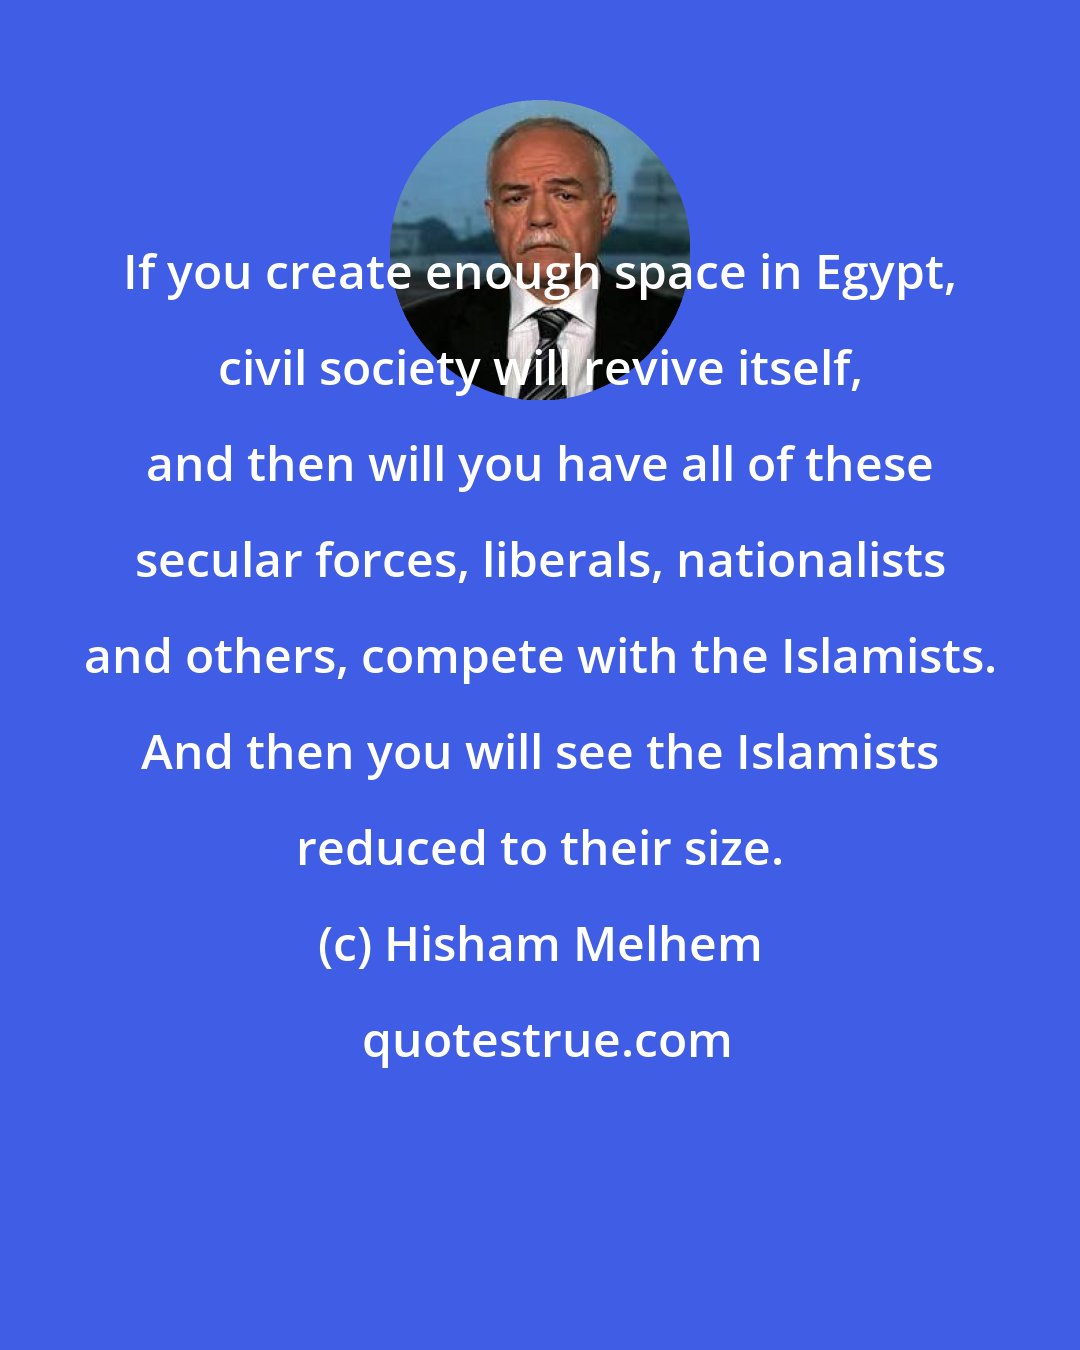 Hisham Melhem: If you create enough space in Egypt, civil society will revive itself, and then will you have all of these secular forces, liberals, nationalists and others, compete with the Islamists. And then you will see the Islamists reduced to their size.